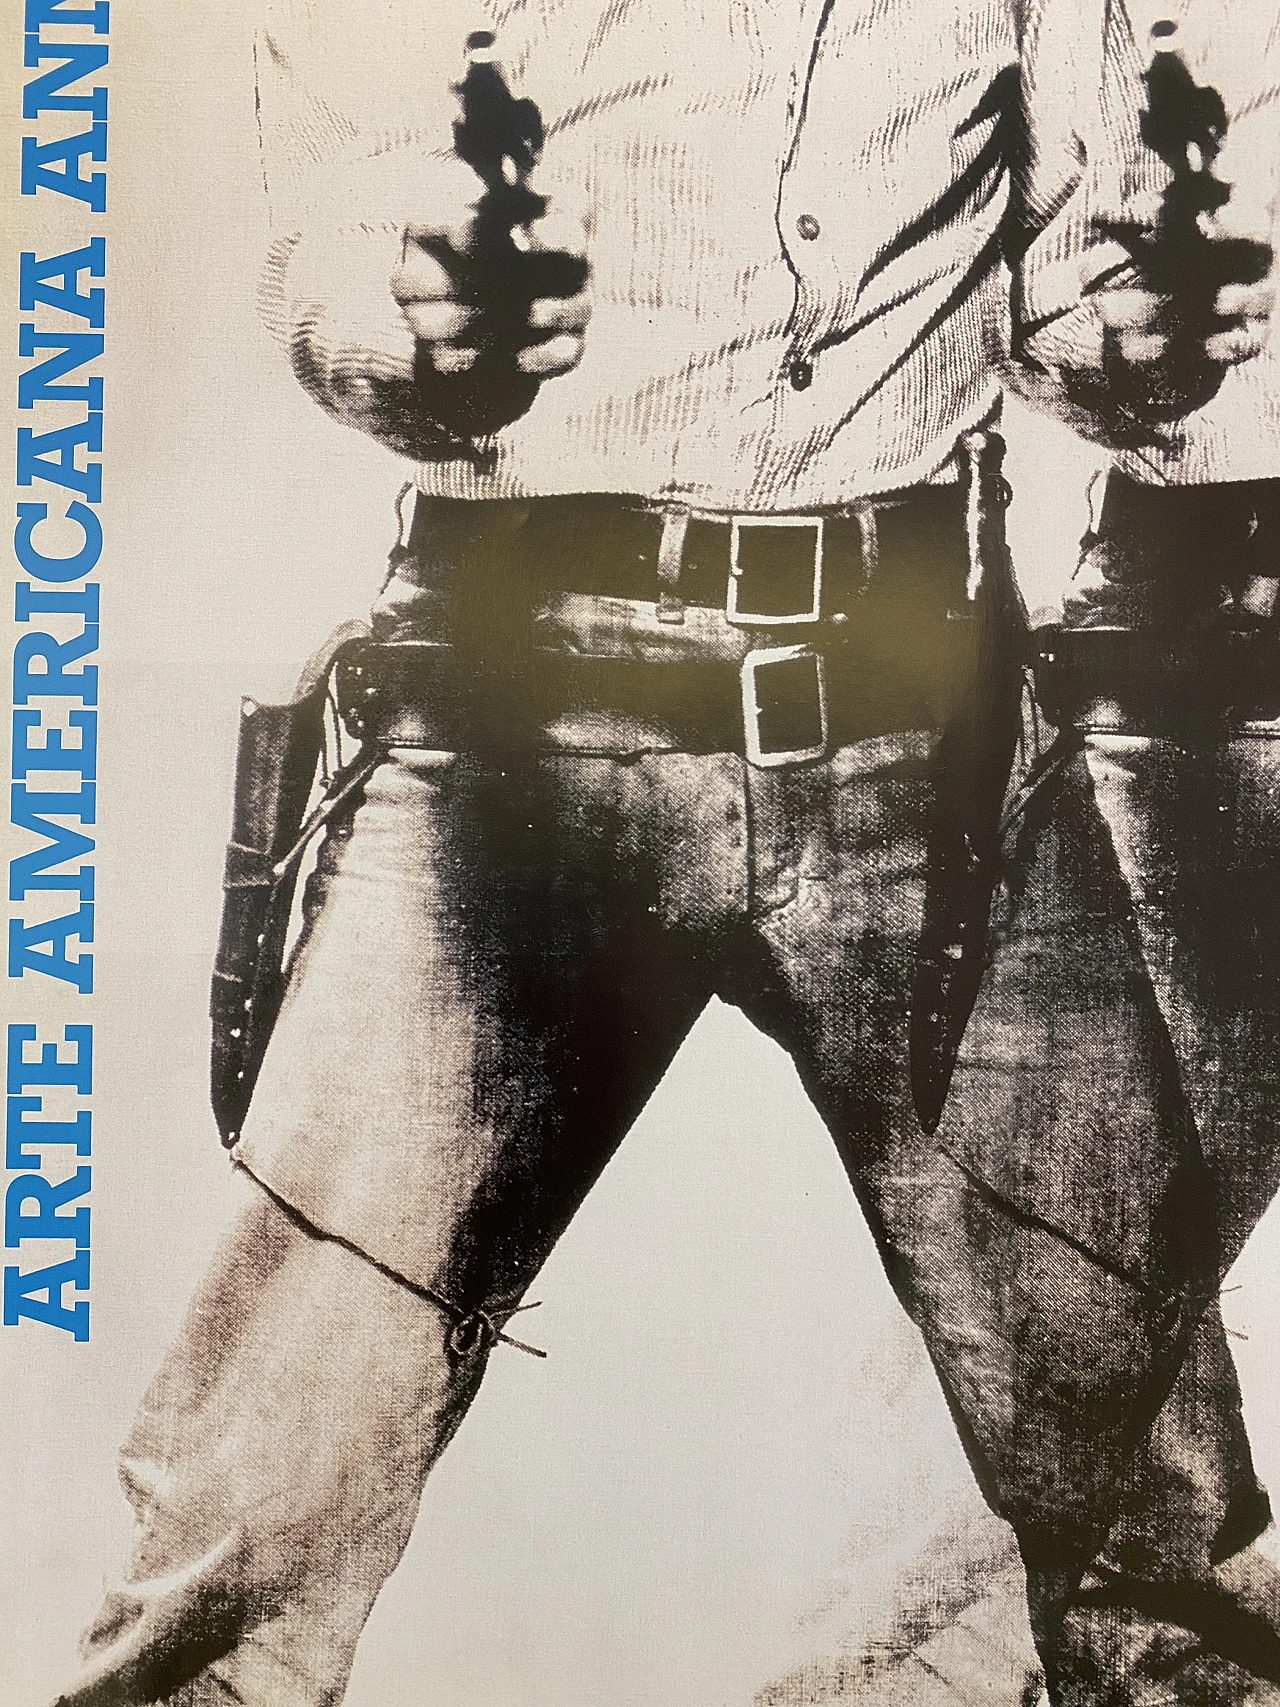 Andy Warhol and Marcello Francone, Arte americana, poster, 1987 12